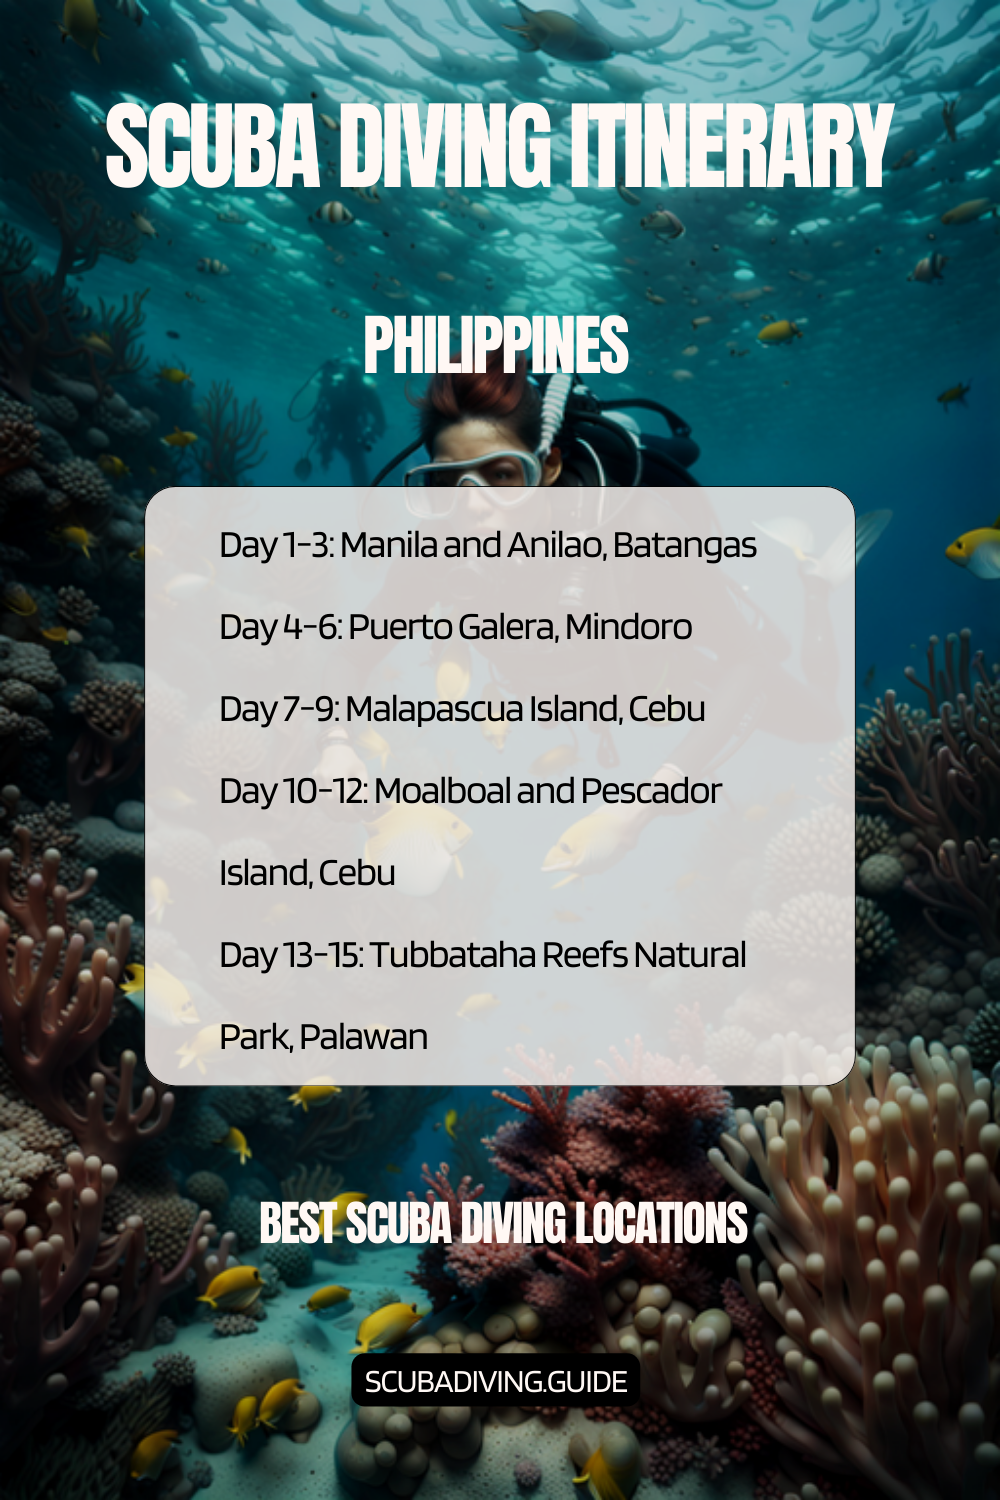 The Philippines Recommended Scuba Diving Itinerary